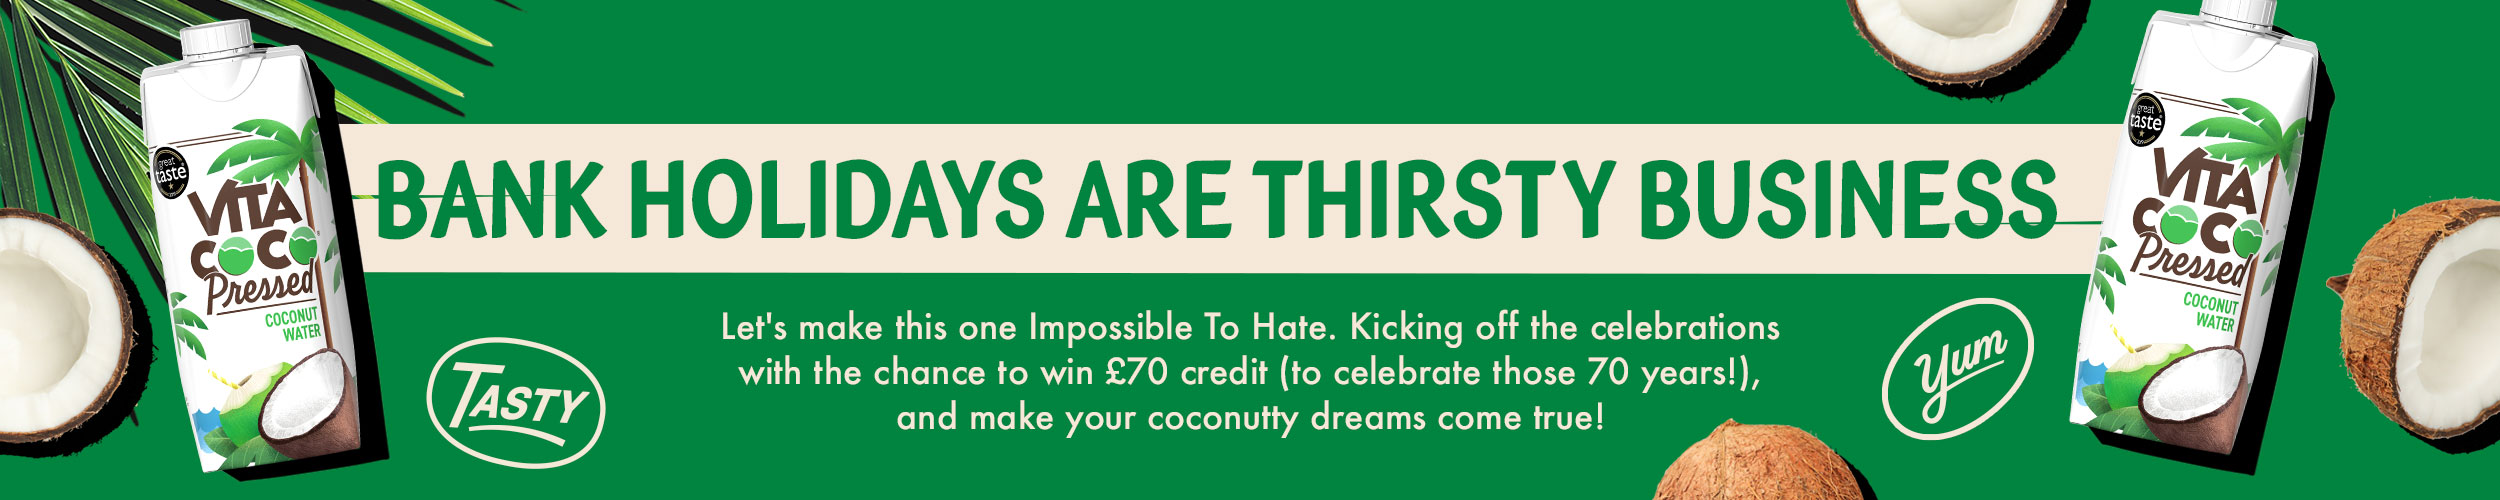 Bank Holidays are thirsty business. Lets make this one Impossible To Hate. Kicking off the celebrations with the chance to win £70 credit (to celebrate those 70 years!), and make your coconutty dreams come true!